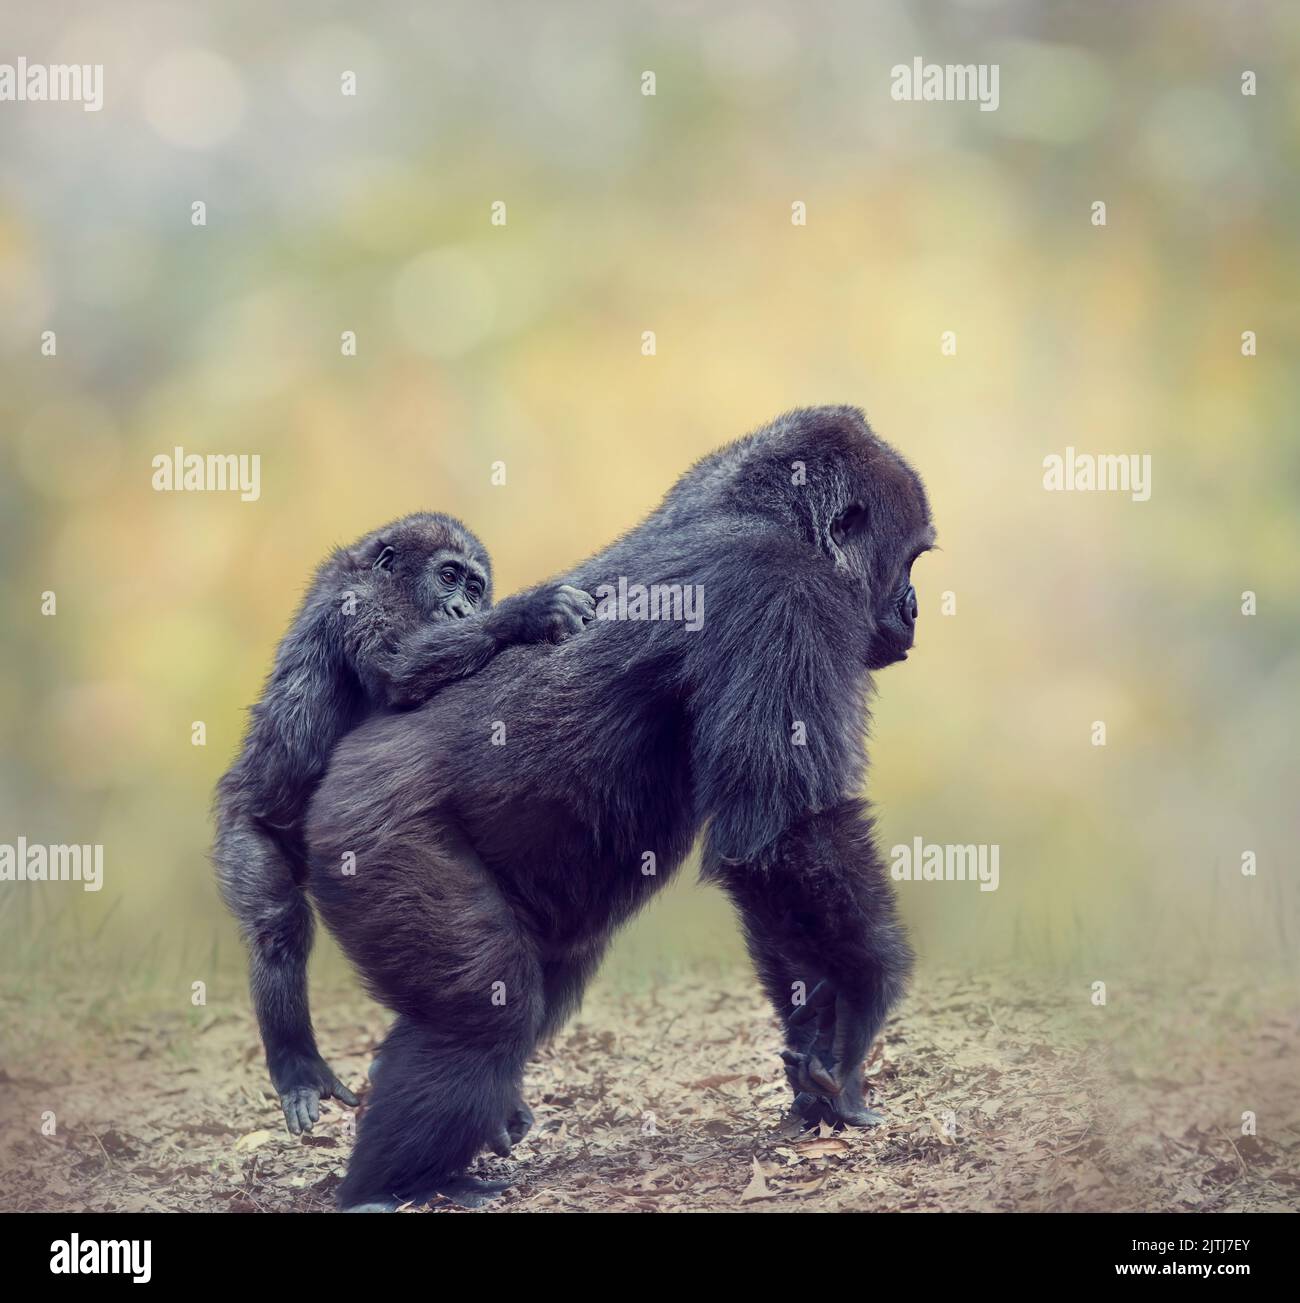 Gorilla Female with Her Baby Walking Stock Photo